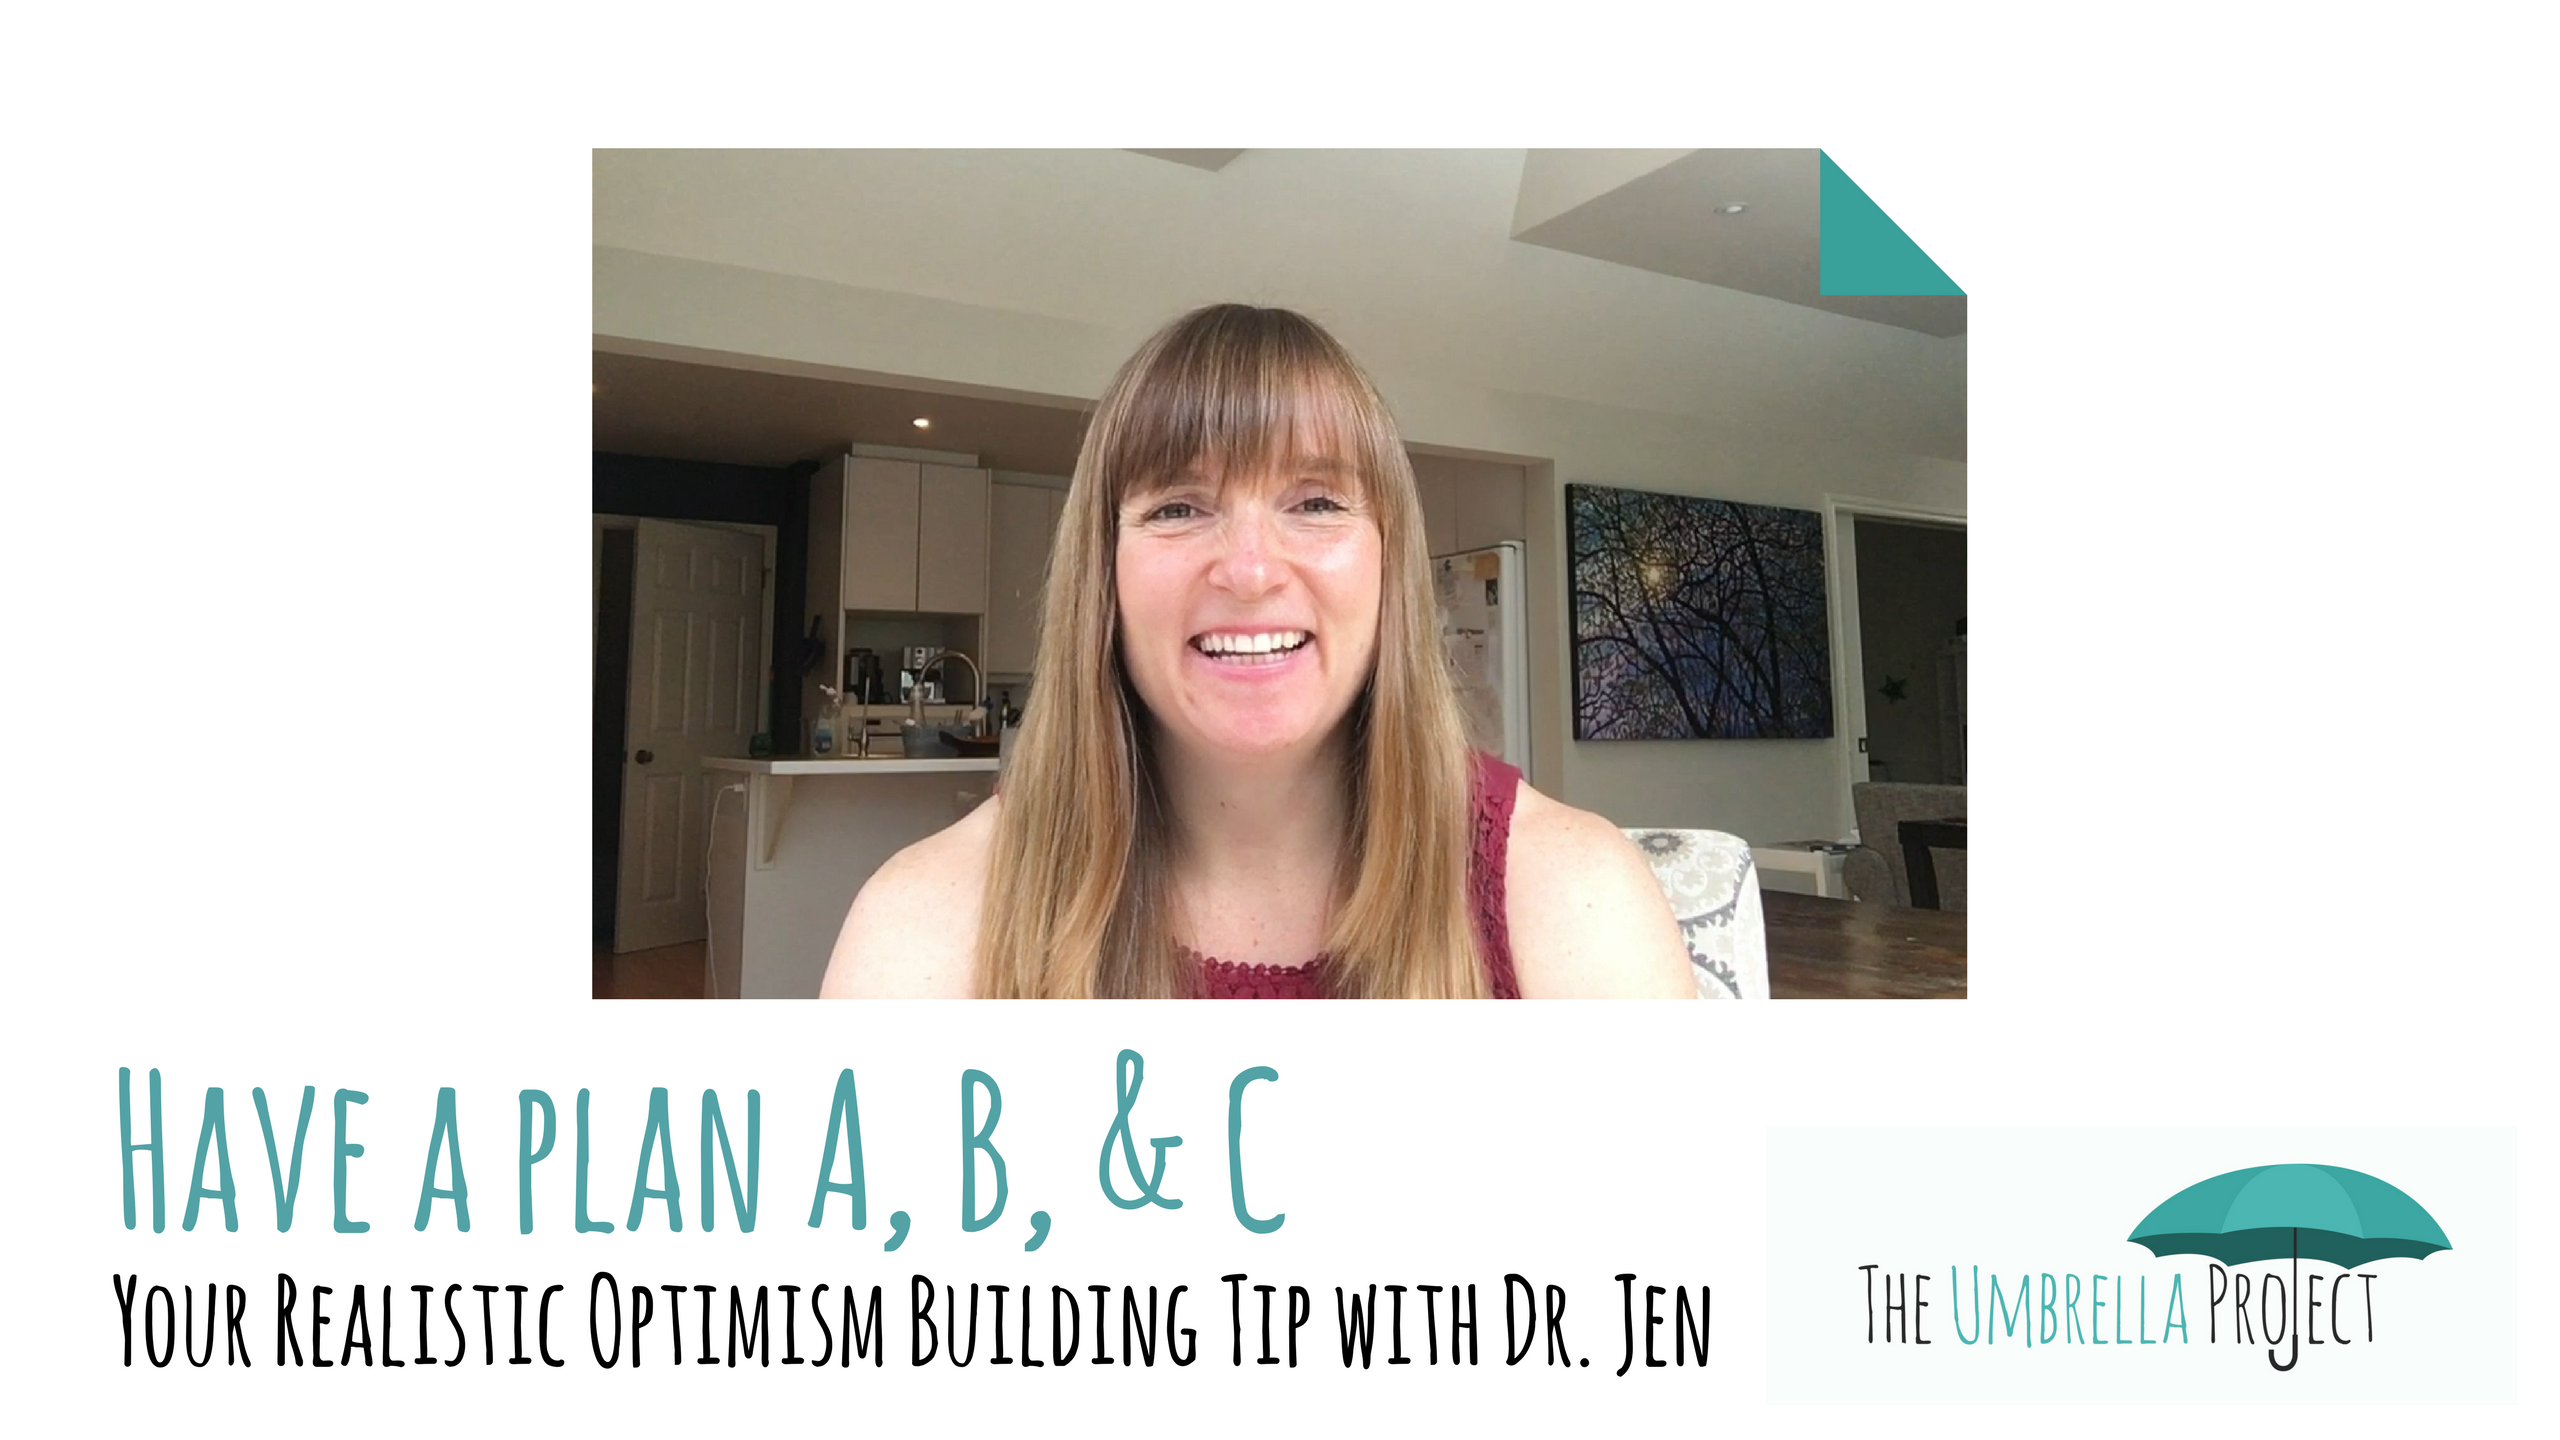 Have a Plan A, B, & C: Your Realistic Optimism Building Tip with Dr. Jen